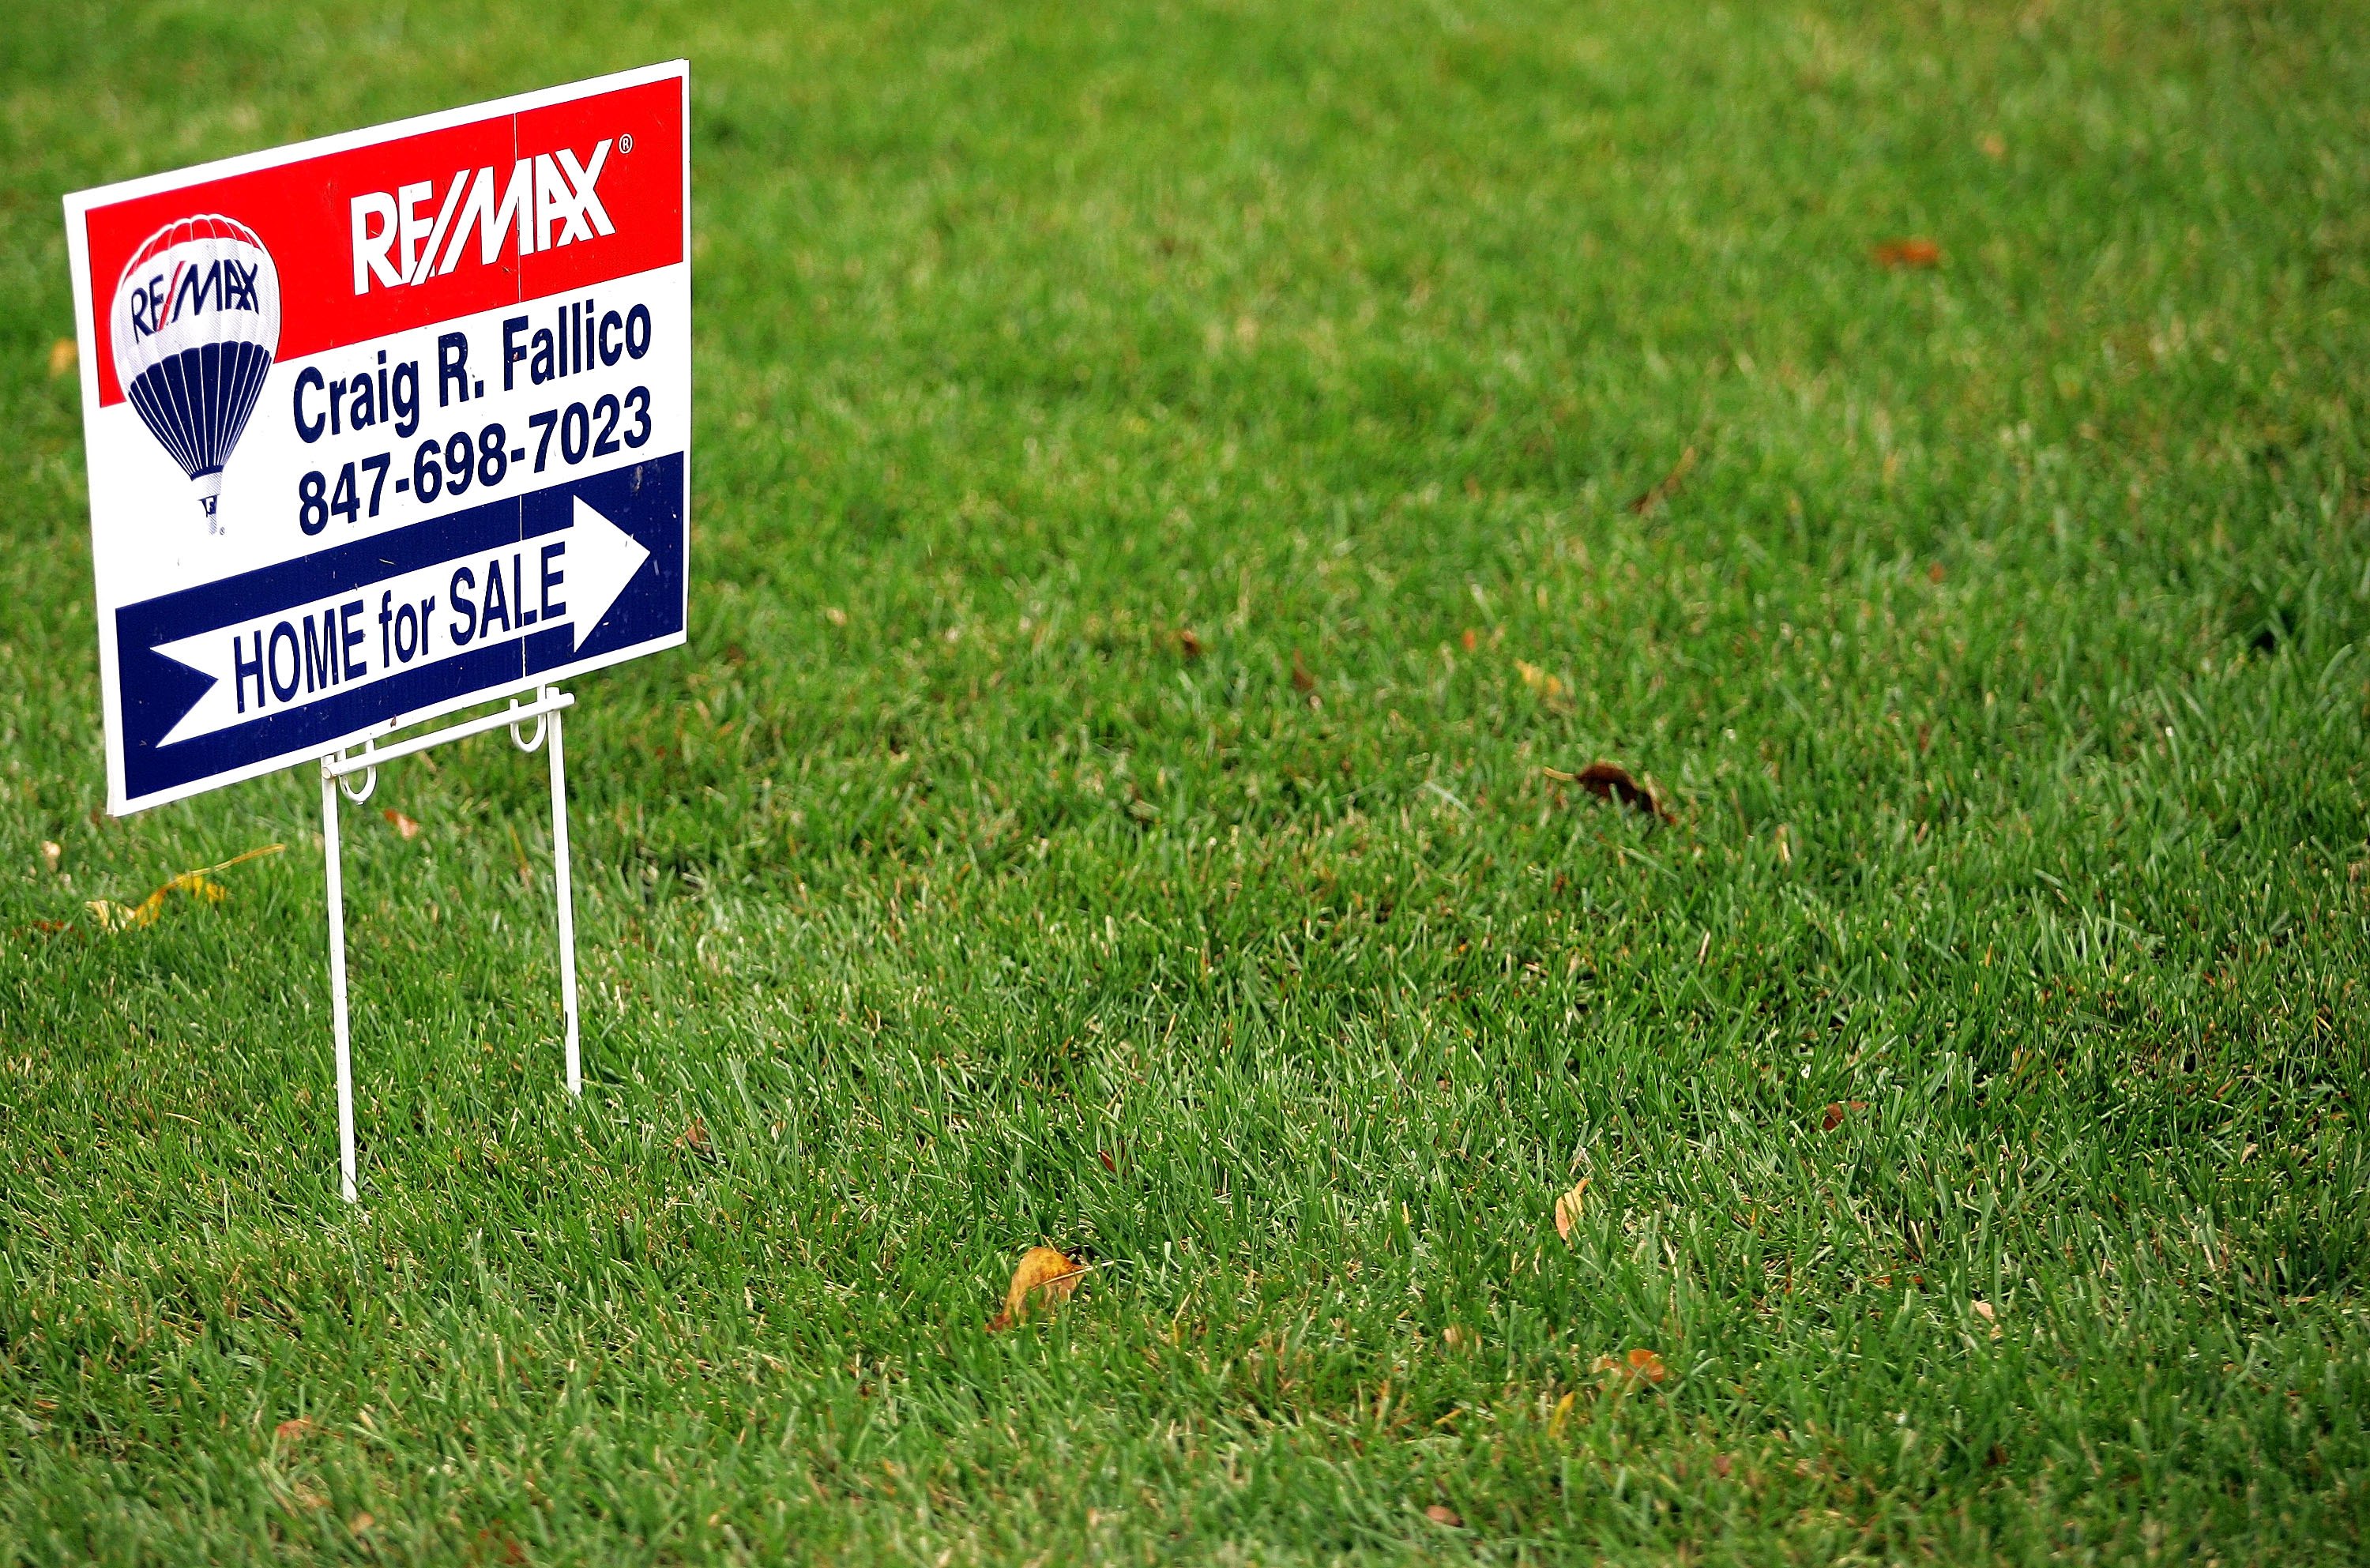 Why longtime DC-area homeowners may have trouble selling